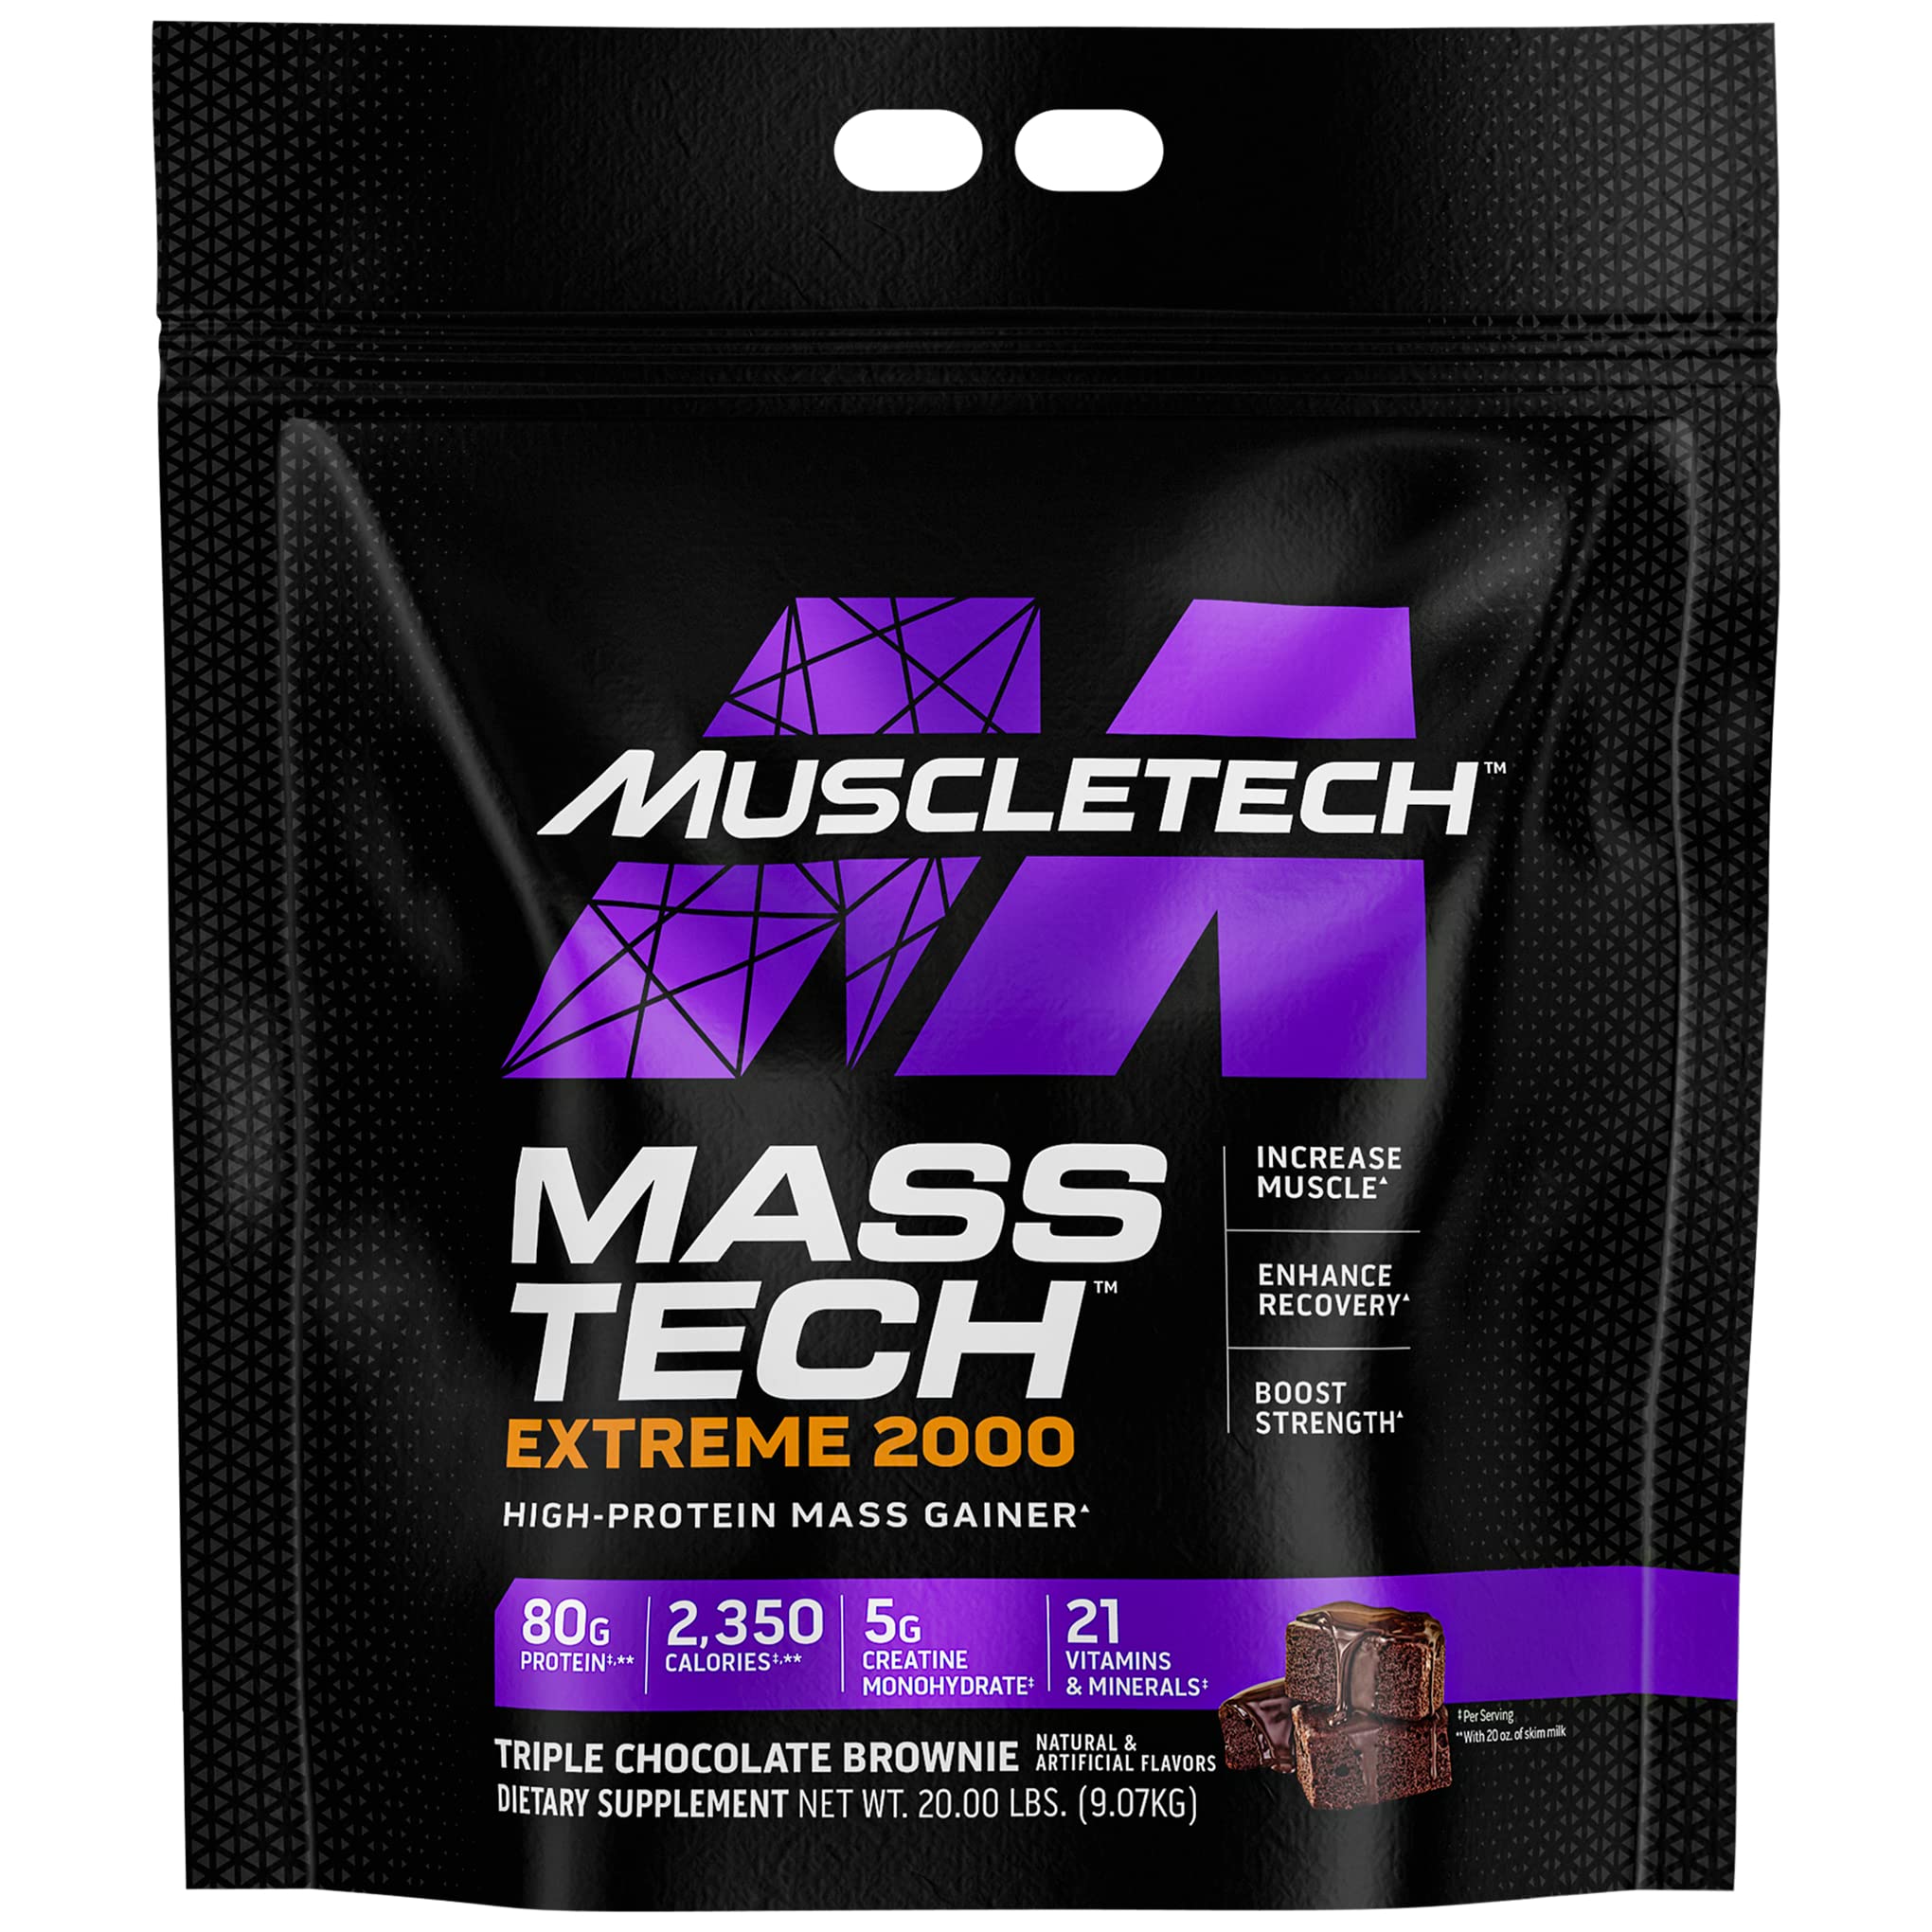 MuscleTech Mass Gainer Protein Powder, Mass-Tech Extreme 2000, Muscle Builder Whey Protein Powder, Protein + Creatine + Carbs, Max-Protein Weight Gainer for Women & Men, Triple Chocolate, 20 lbs